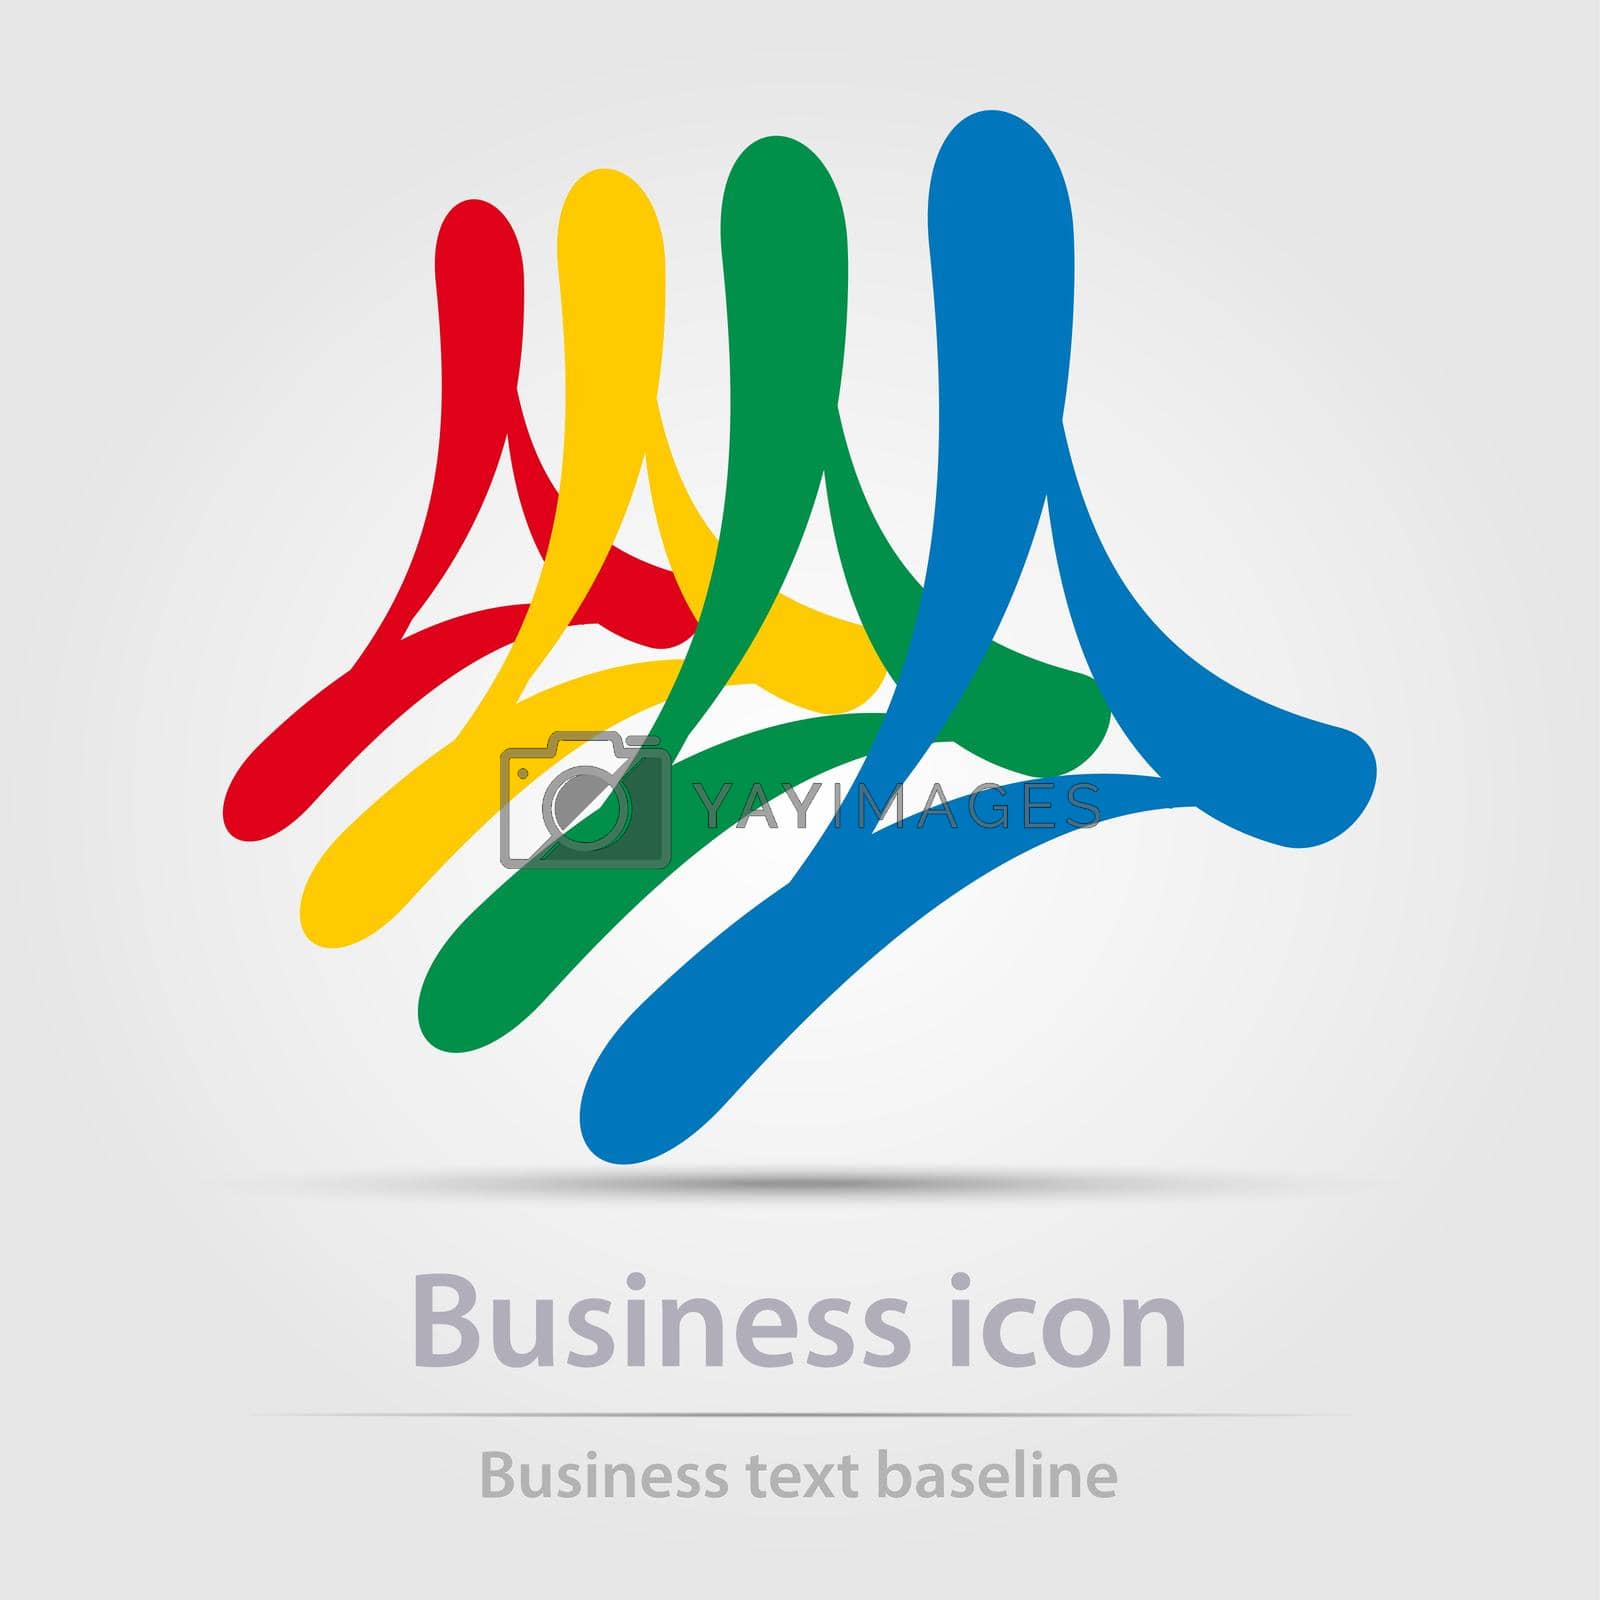 Royalty free image of Originally designed vector color business icon by stocklady